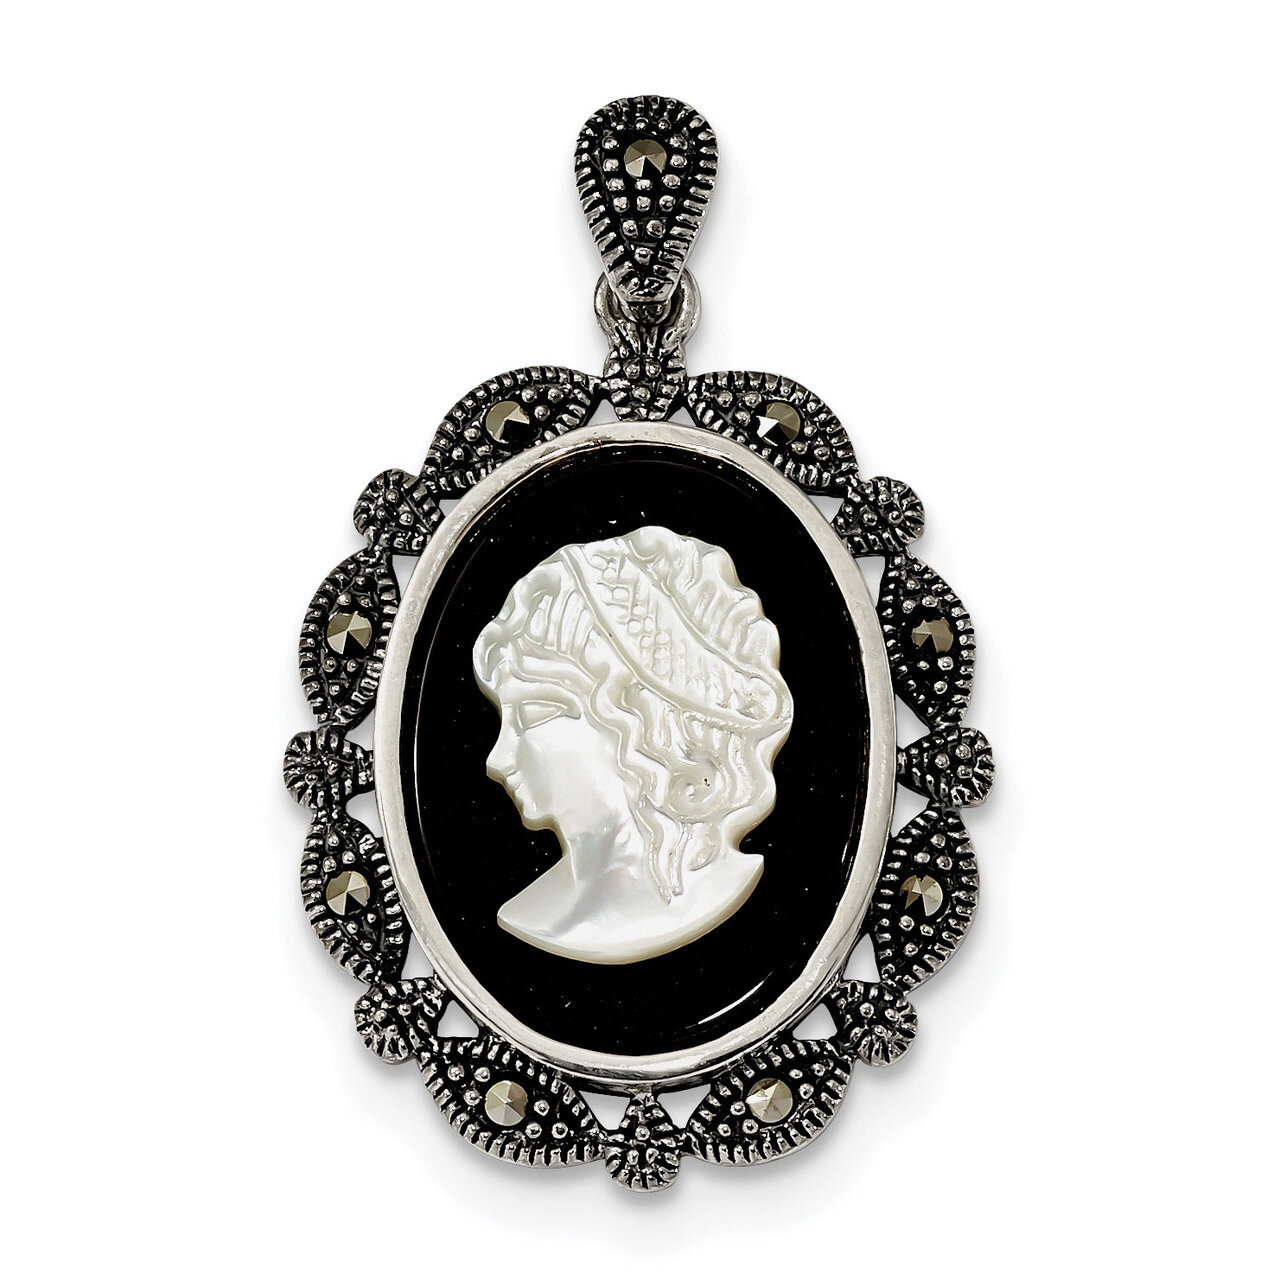 Marcasite Black Agate & Mother of Pearl White Cameo Pendant Sterling Silver Antiqued QC9200